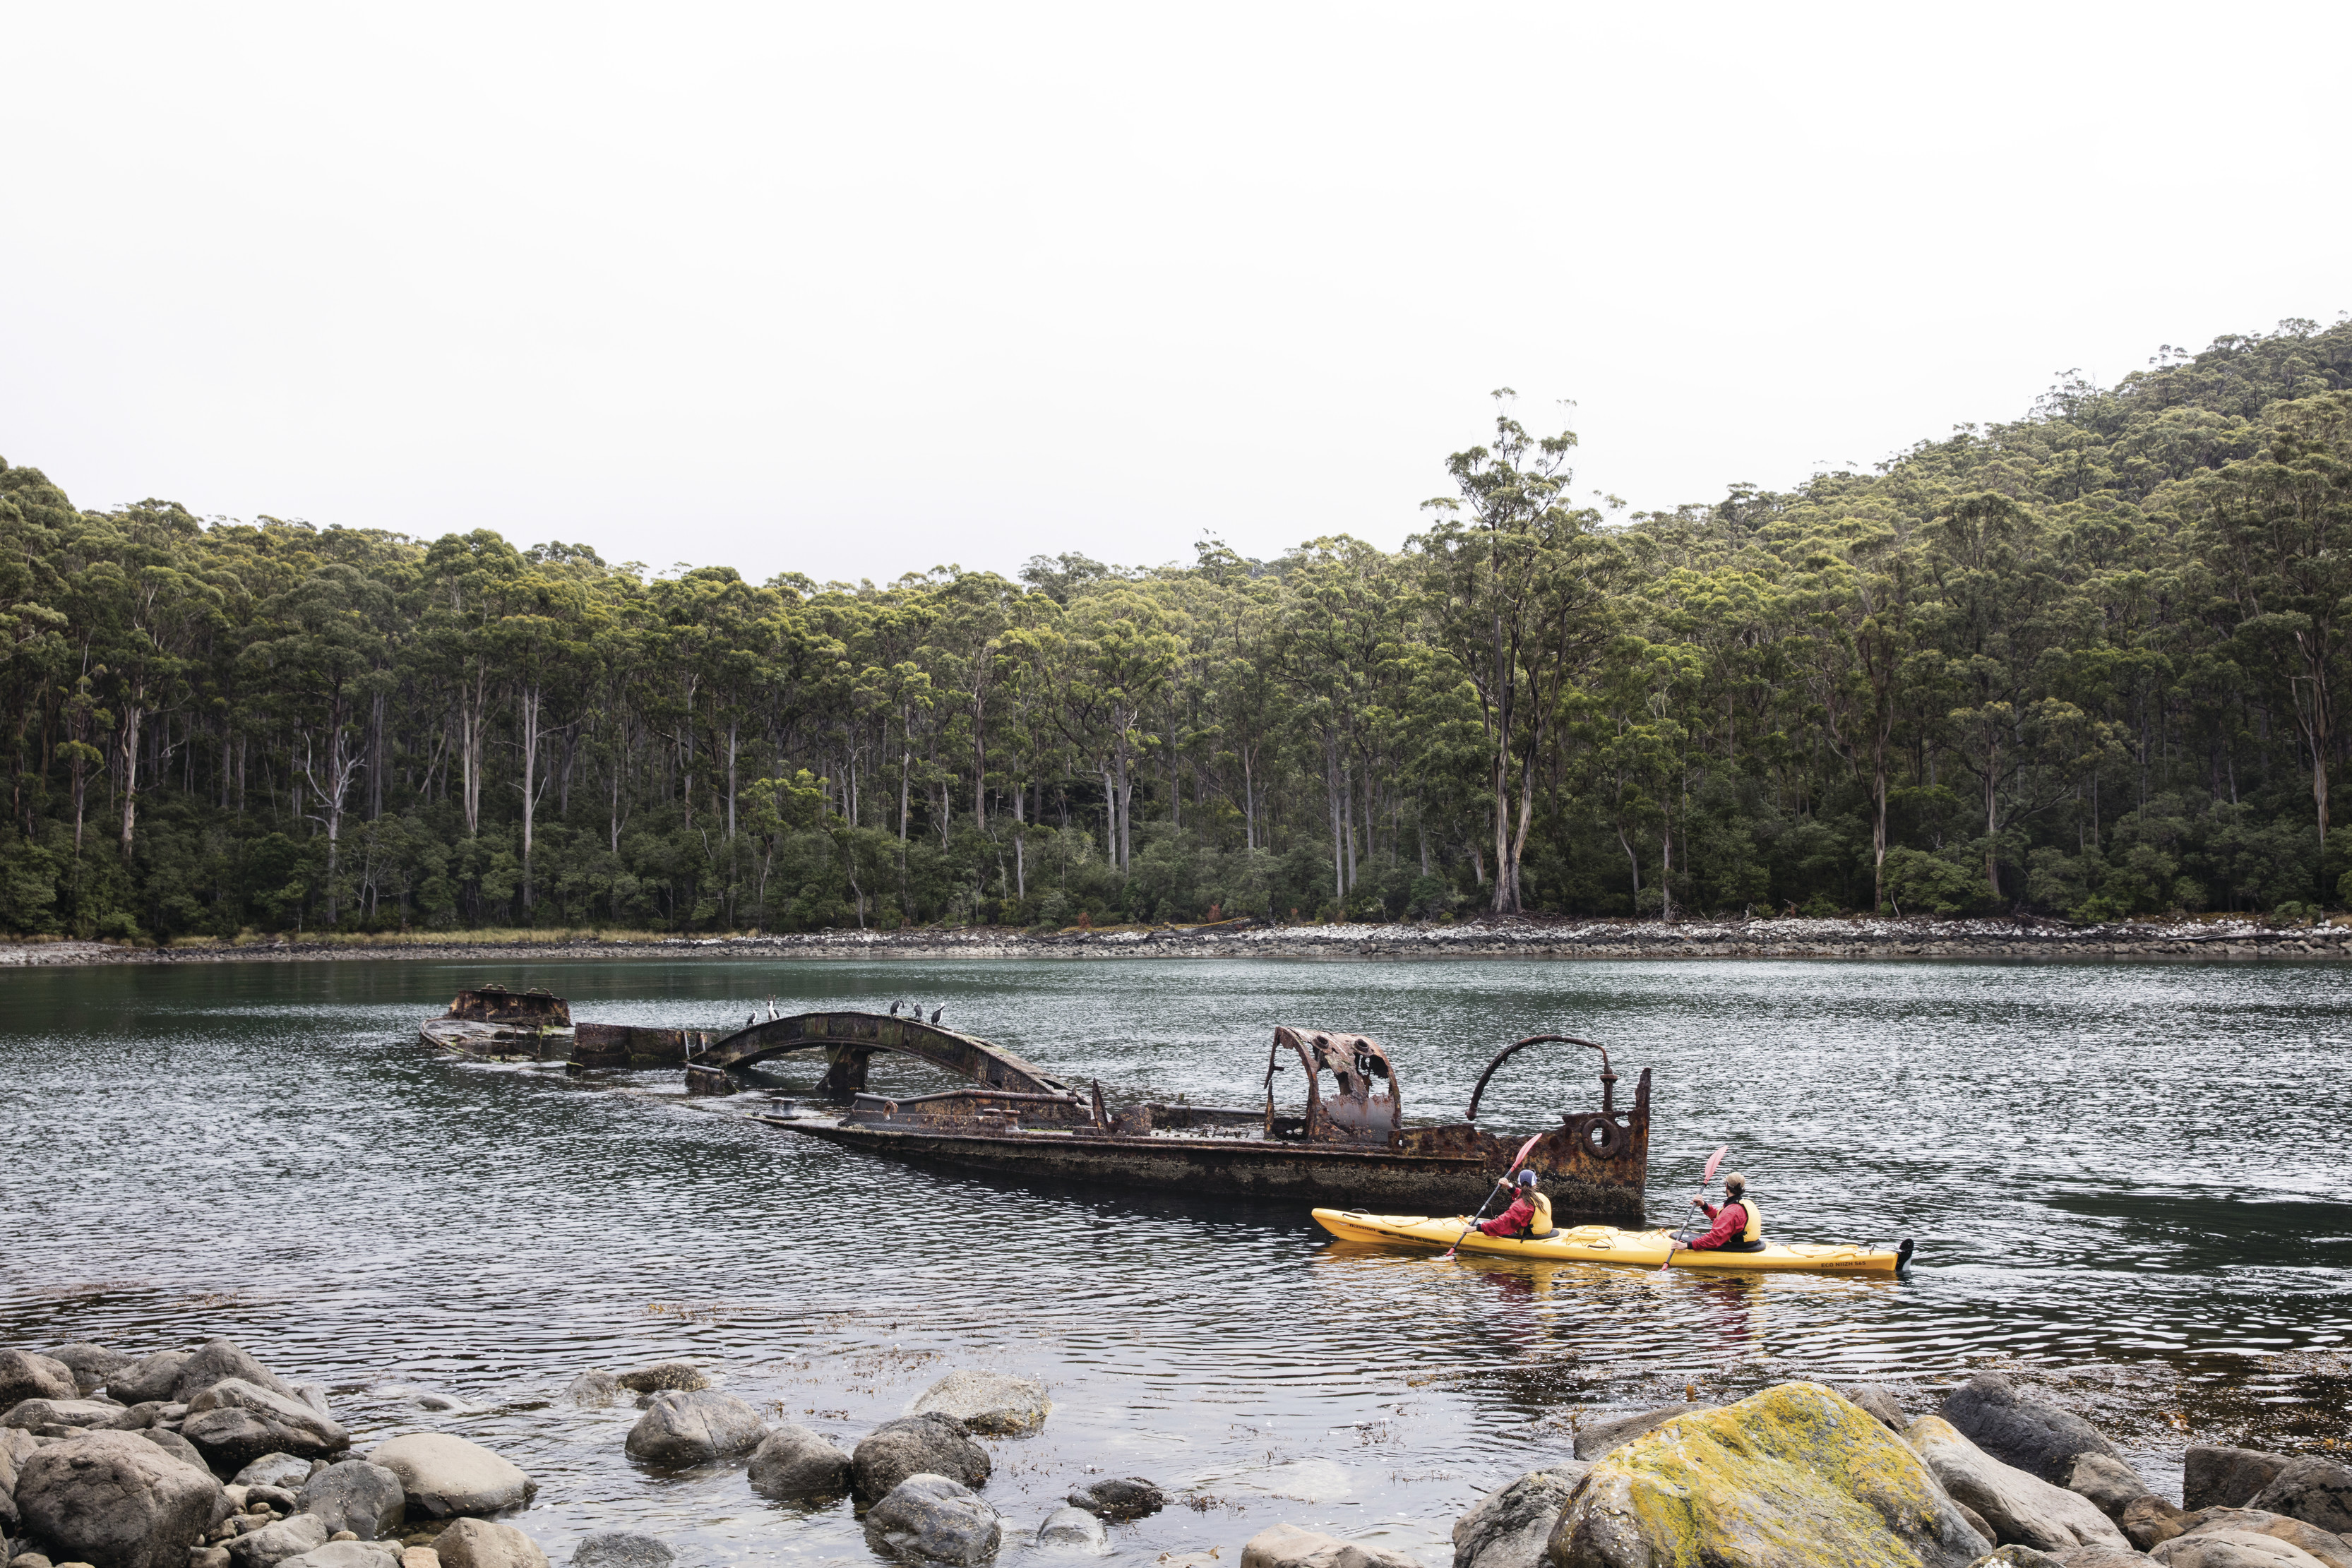 Wide of two kayakers approaching a shipwreck in the water at Canoe Bay, Tasman National Park. Rainforests in the background.